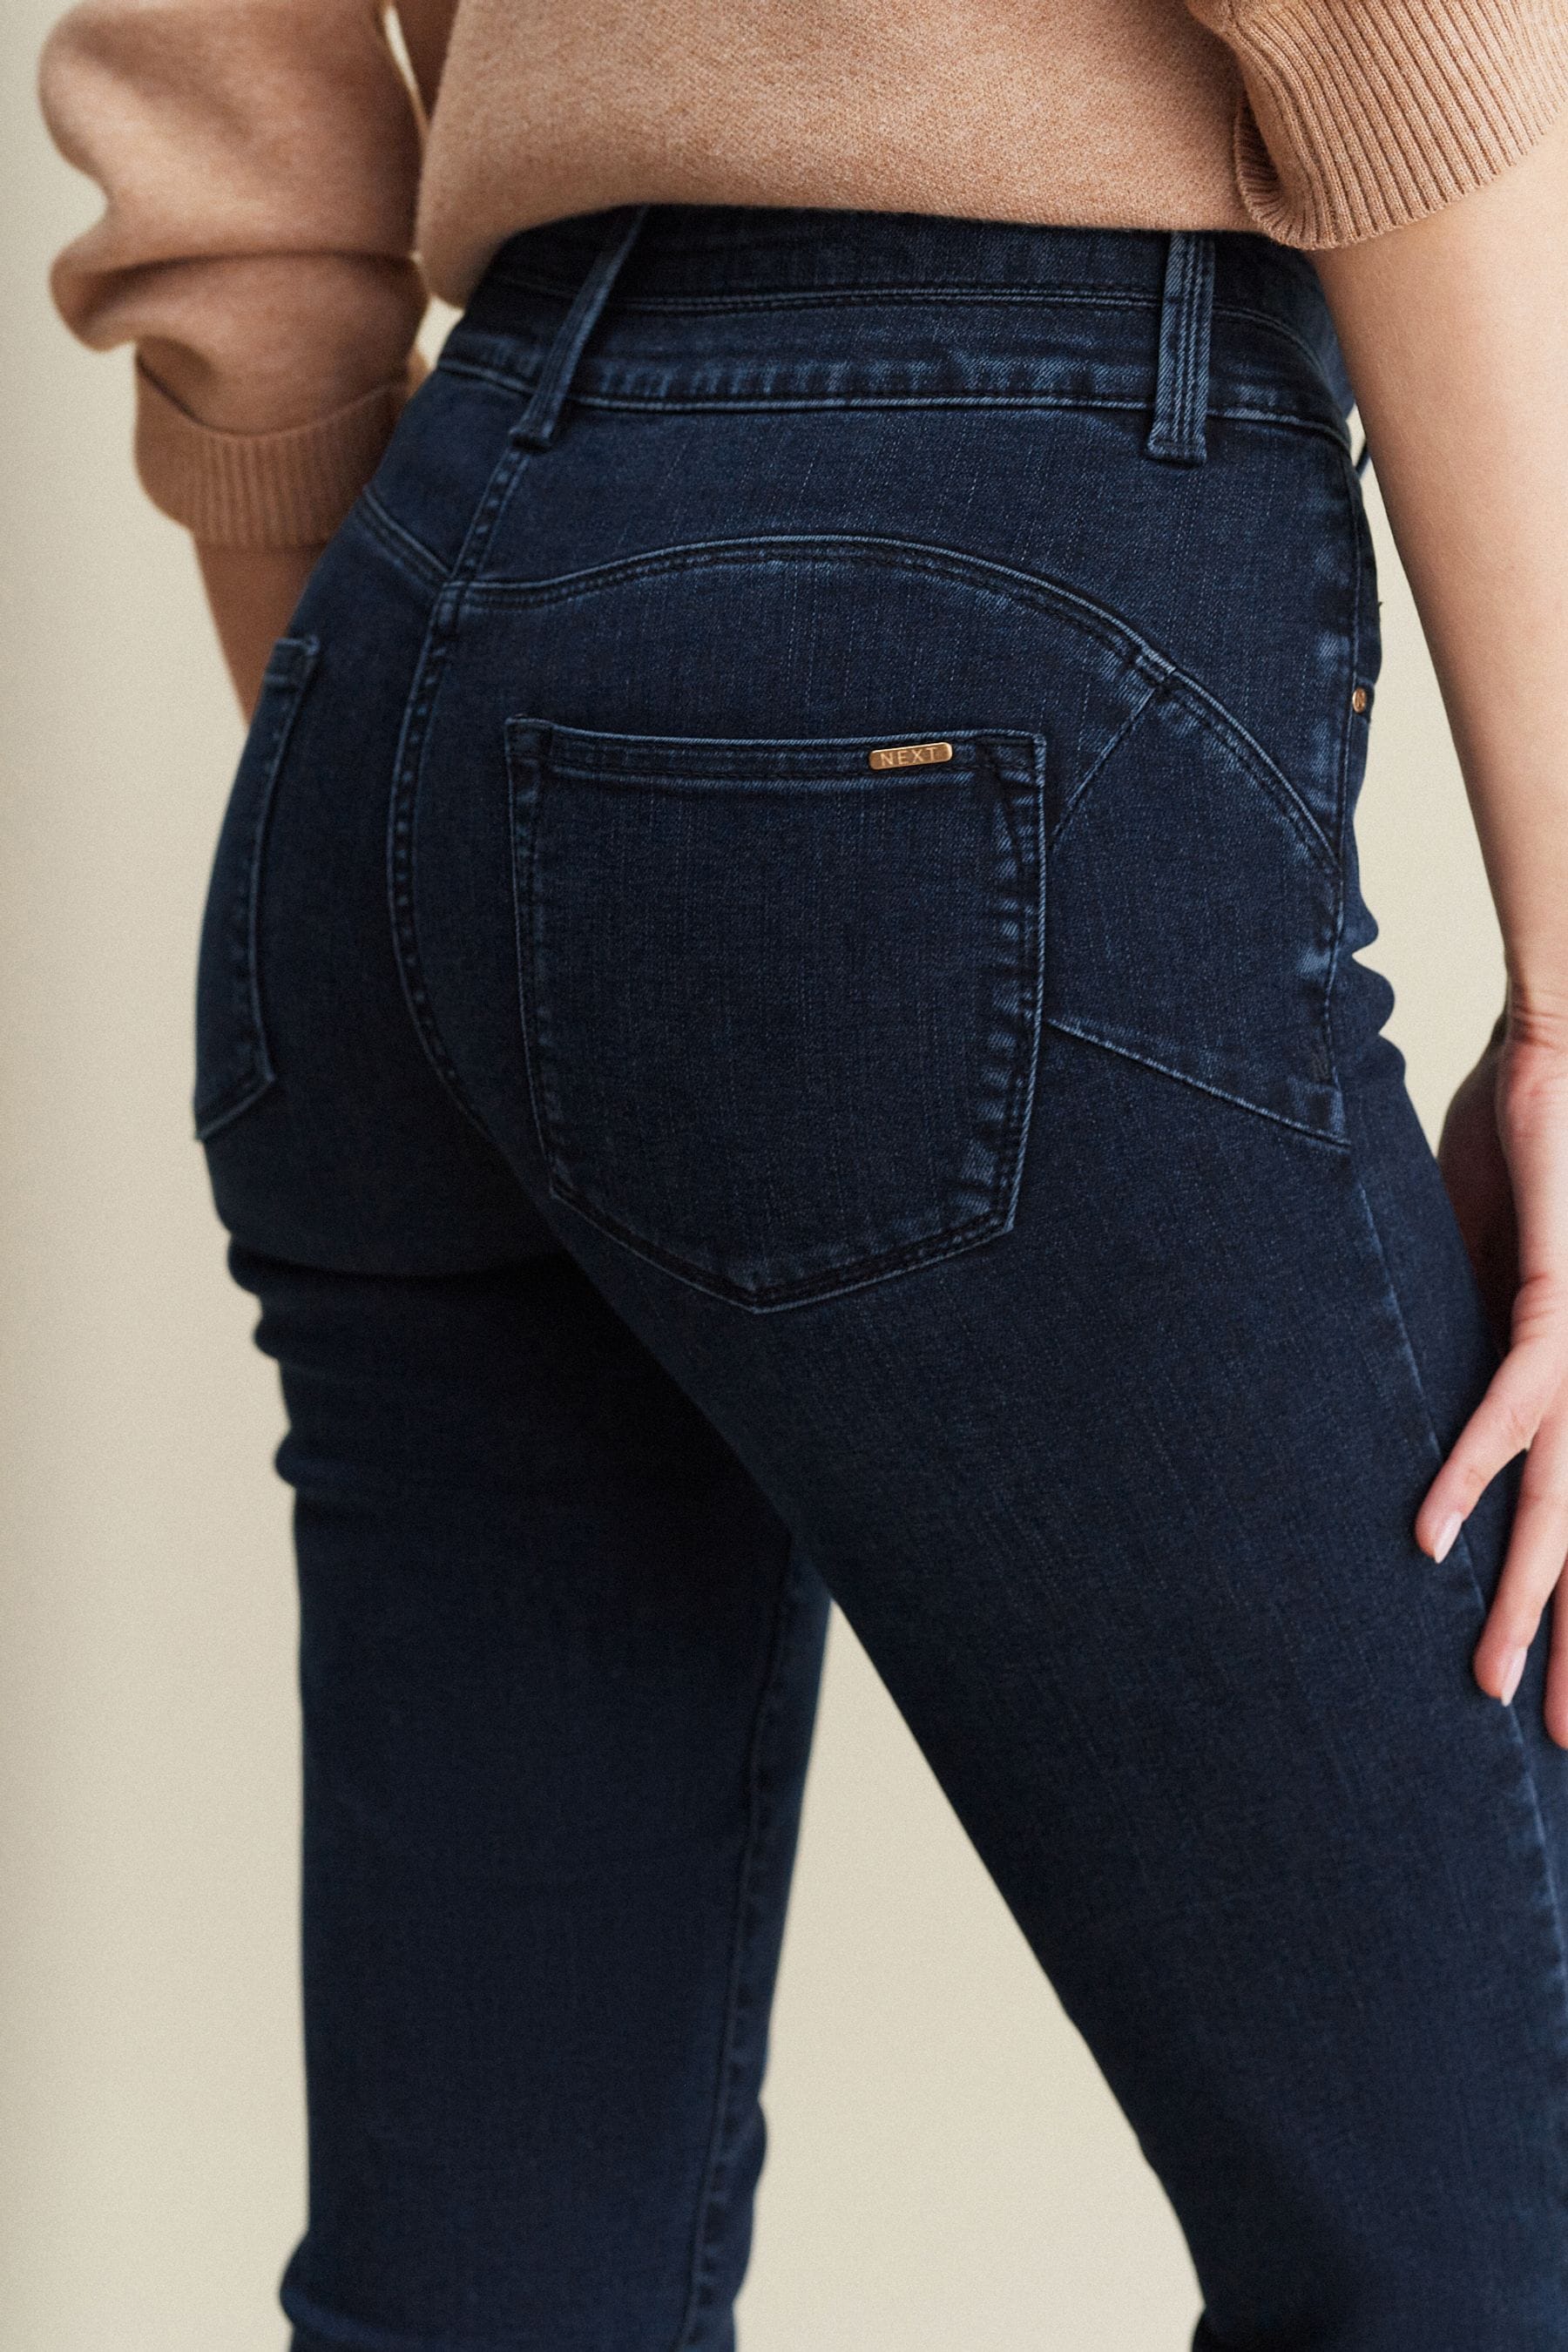 Buy Inky Blue Denim Slim Lift And Shape Jeans from the Next UK online shop